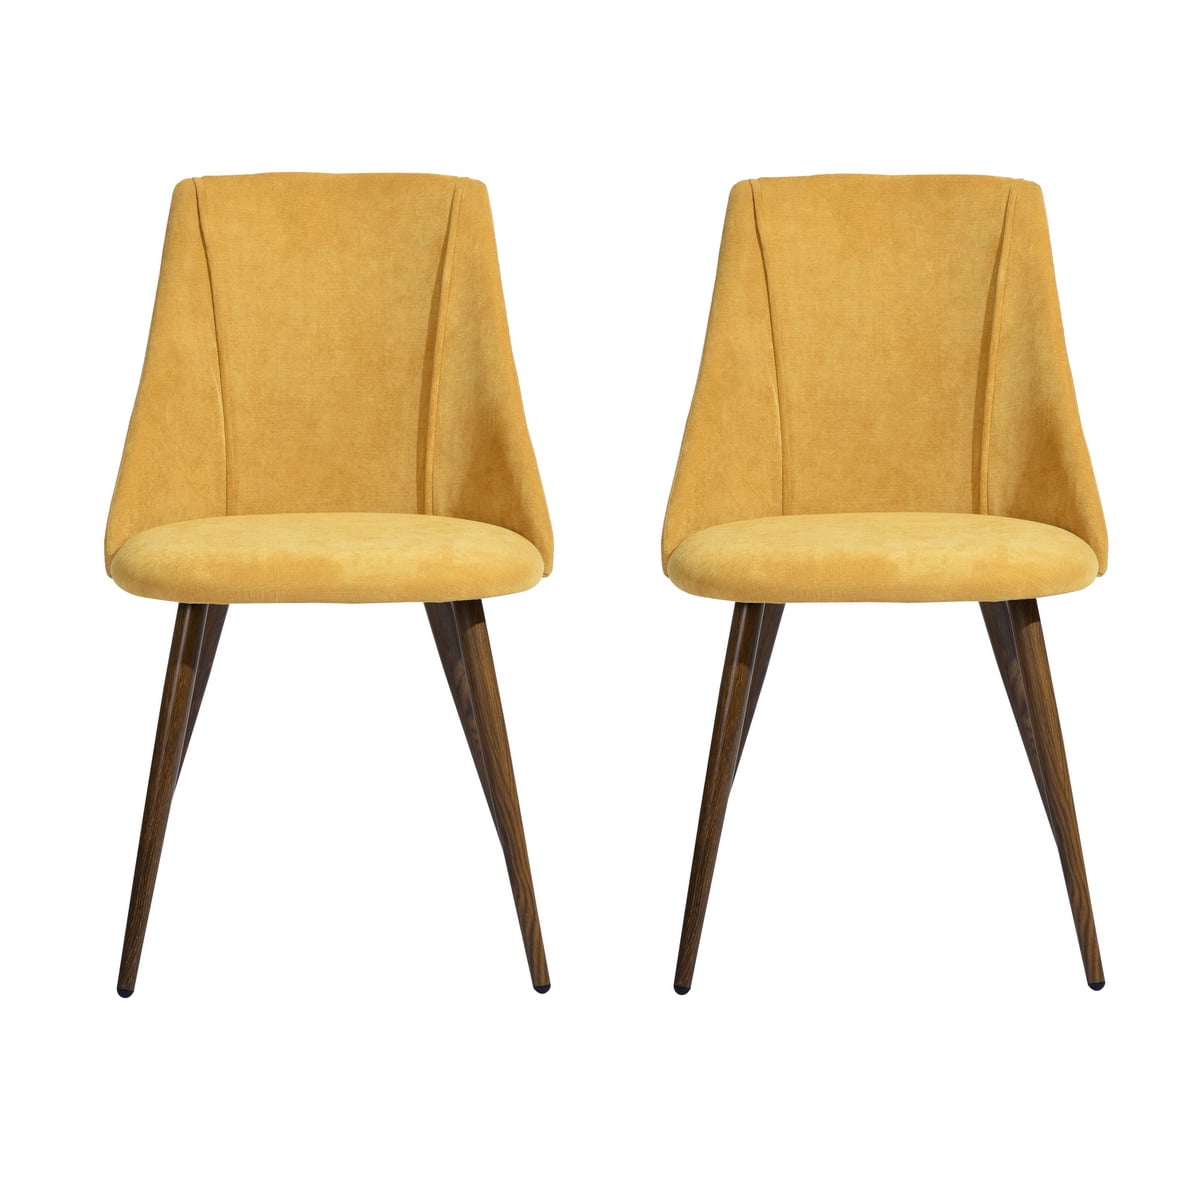 Emma Velvet Modern Dining Chairs, Yellow Leather Dining Chairs